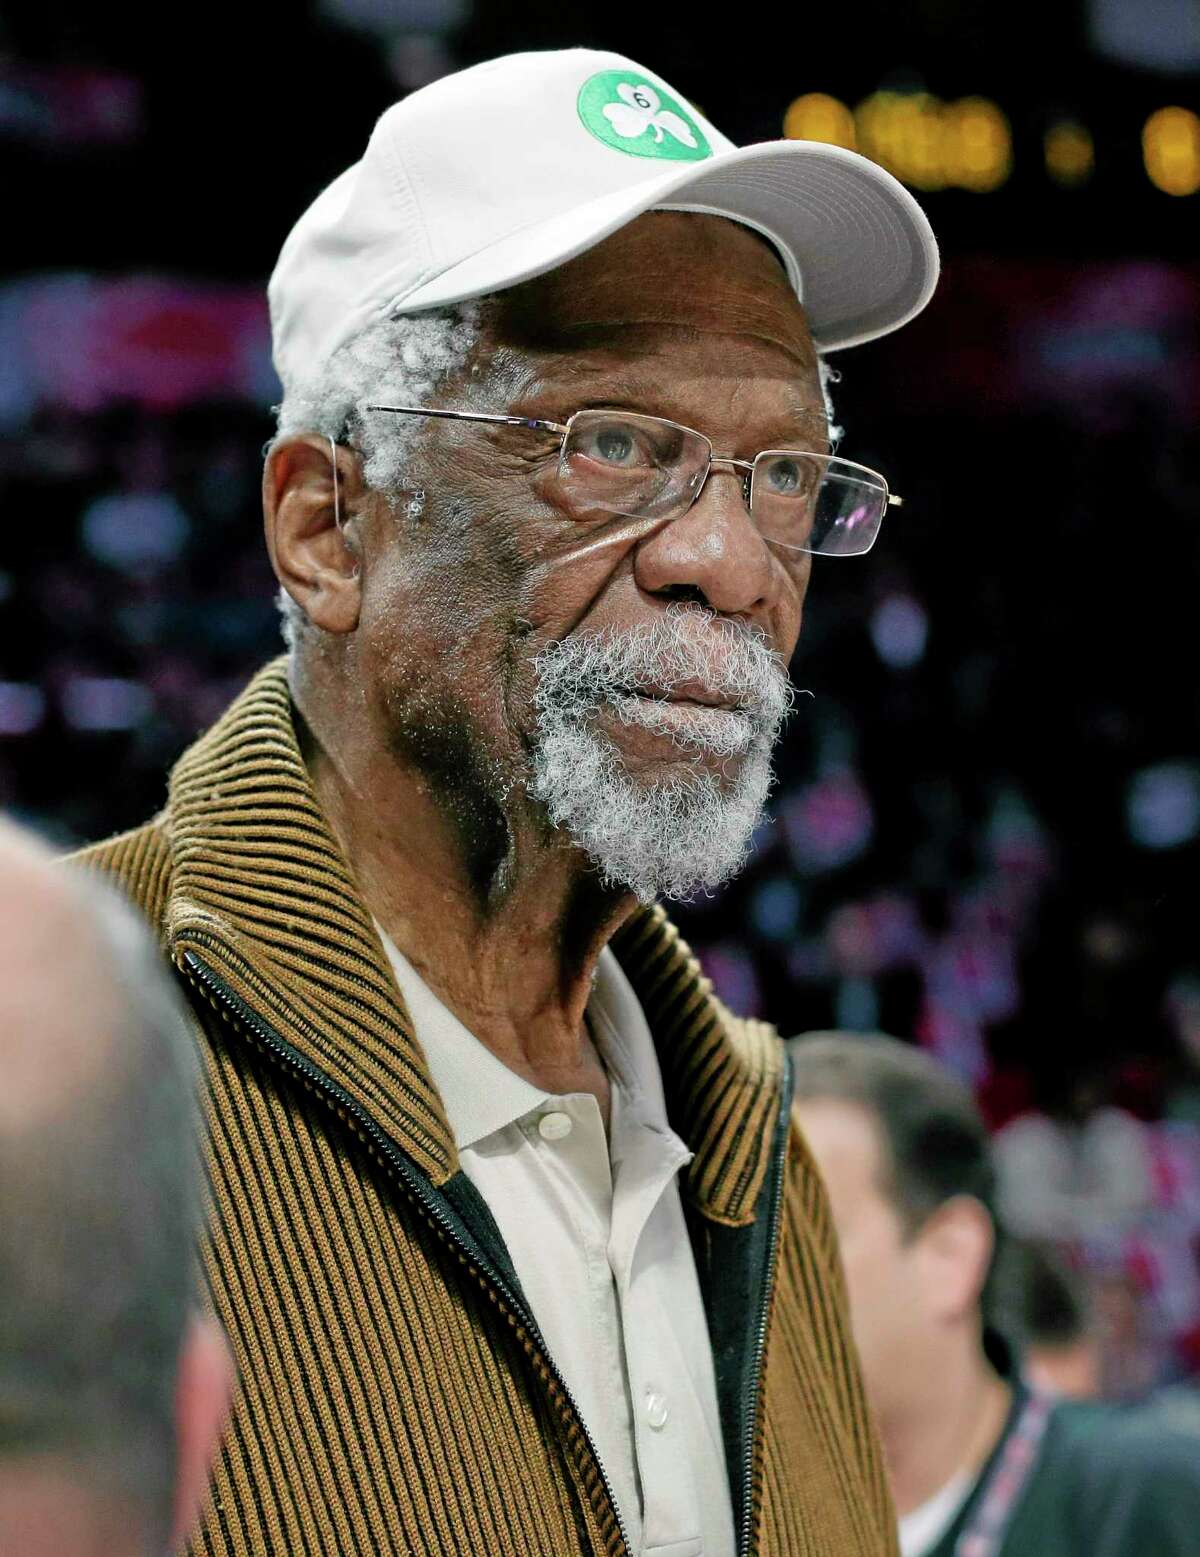 Boston Celtics legend Bill Russell is doing OK after collapsing during a speaking engagement Thursday near Lake Tahoe, Nev.